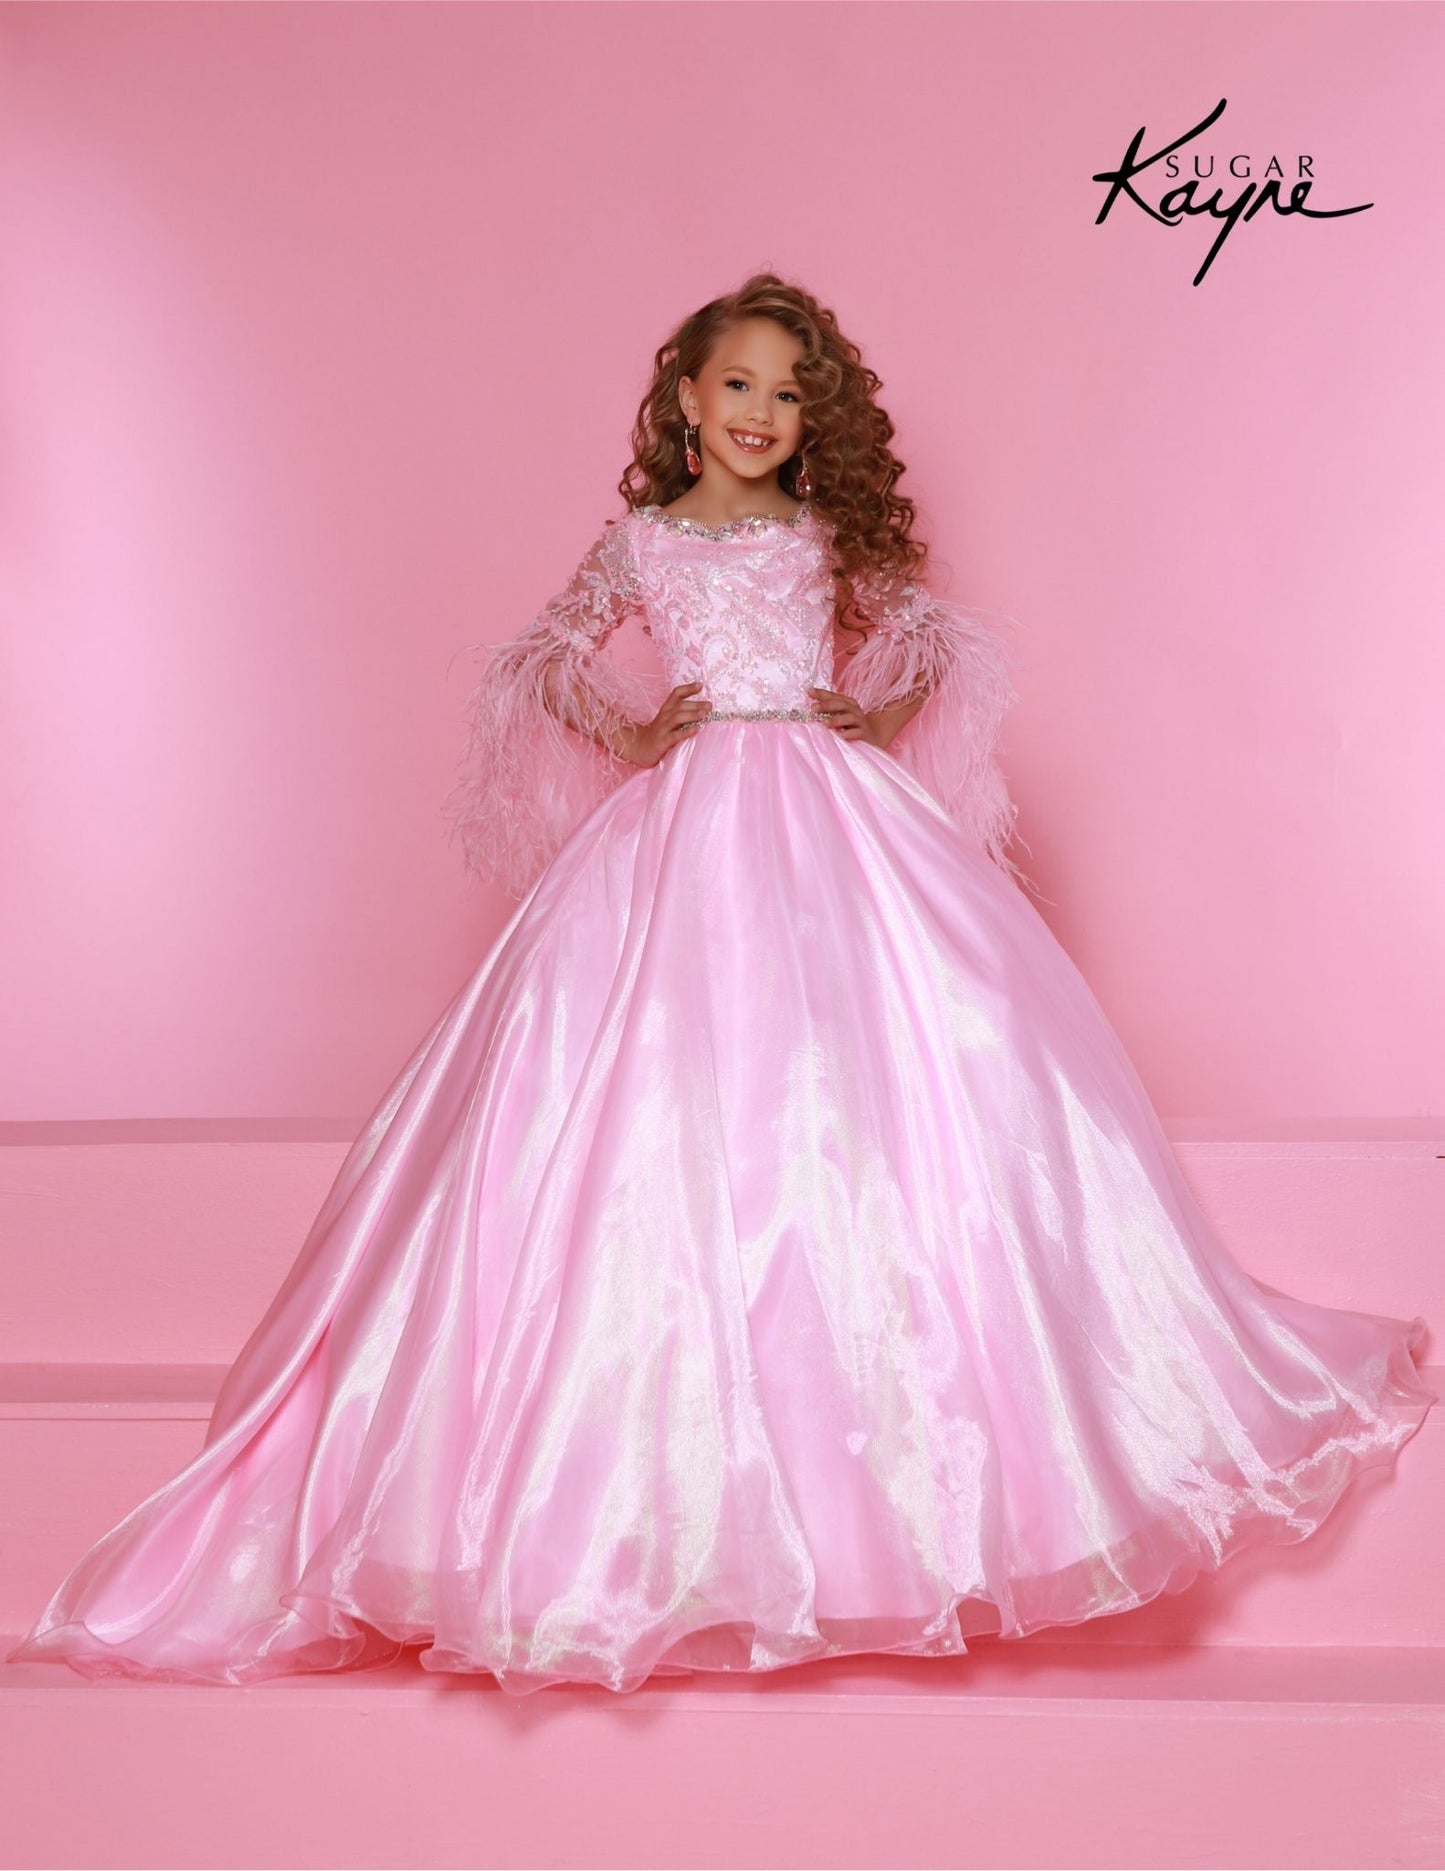 The Sugar Kayne C338 Preteen Pageant Dress is an elegant A-line ballgown featuring sequin and feather sleeves. Featuring the highest quality materials, this dress is perfect for special occasions and is sure to make your child feel like a princess. Experience twinkling elegance in this Metallic Organza Ballgown. The feathered sleeves are designed to make you feel like royalty.